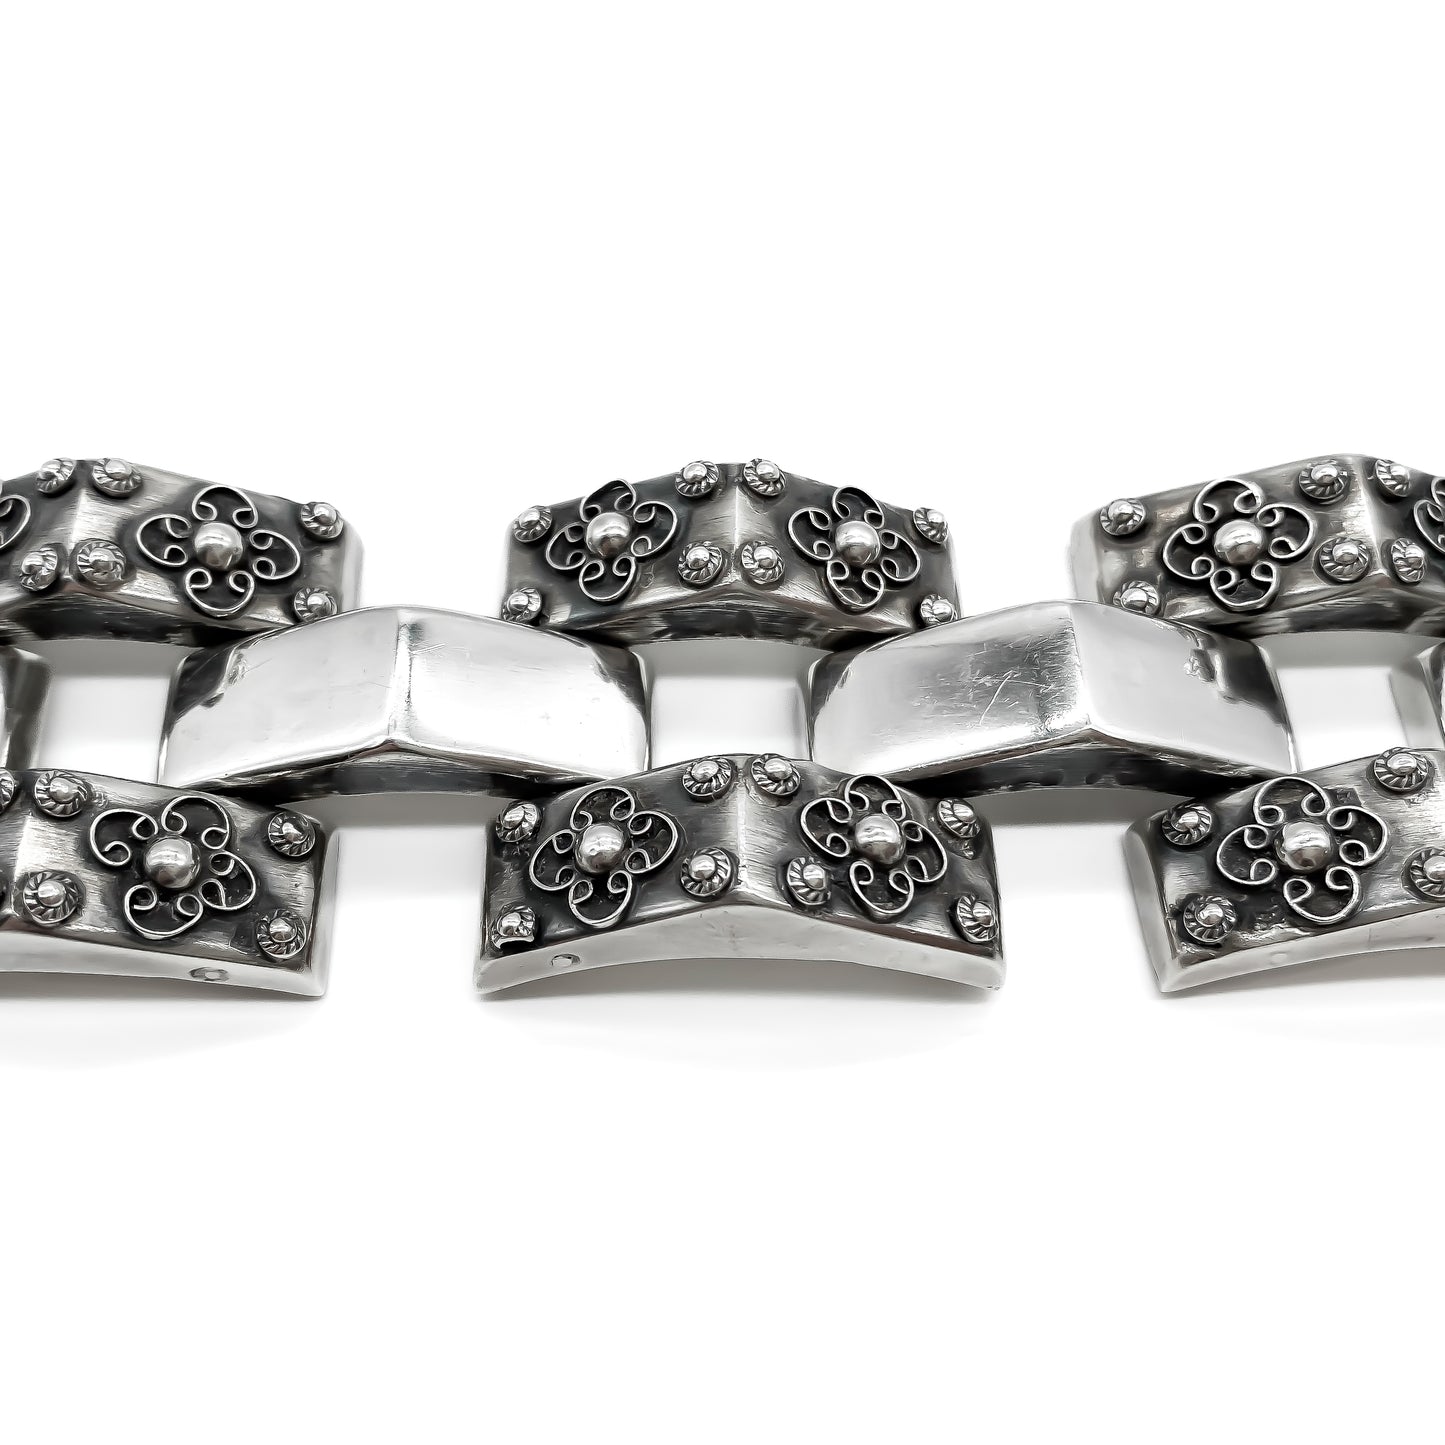 Chunky repoussé silver Mexican bracelet with beautiful ornate filigree detail. Circa 1940’s 